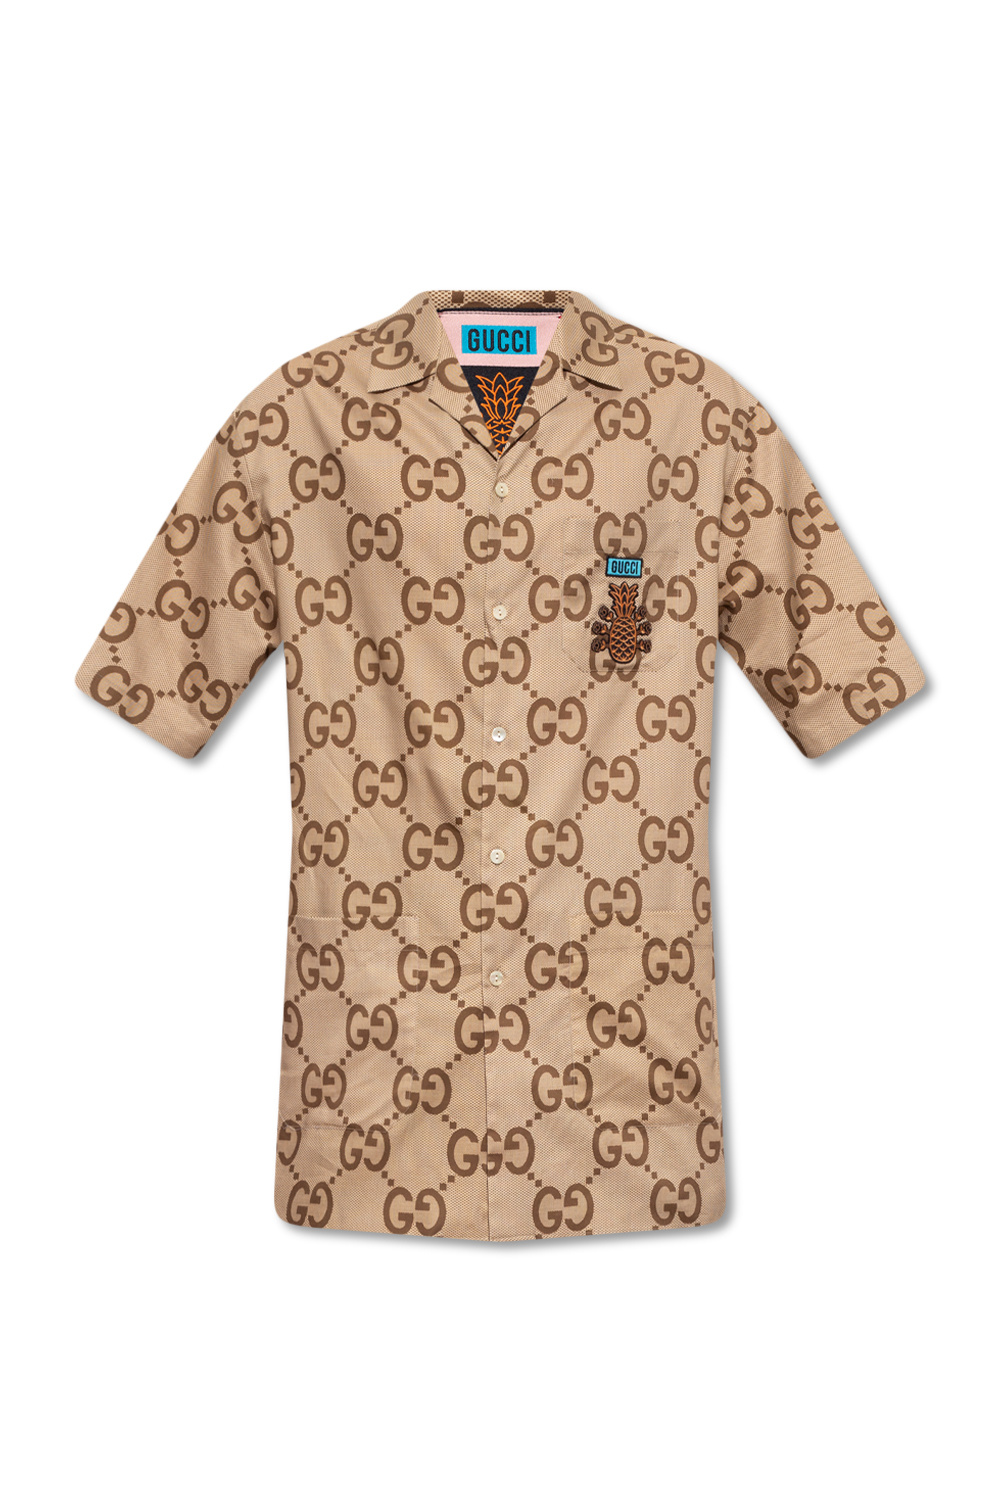 Beige The 'Gucci Pineapple' collection short-sleeved shirt Gucci - Vitkac  Slovakia